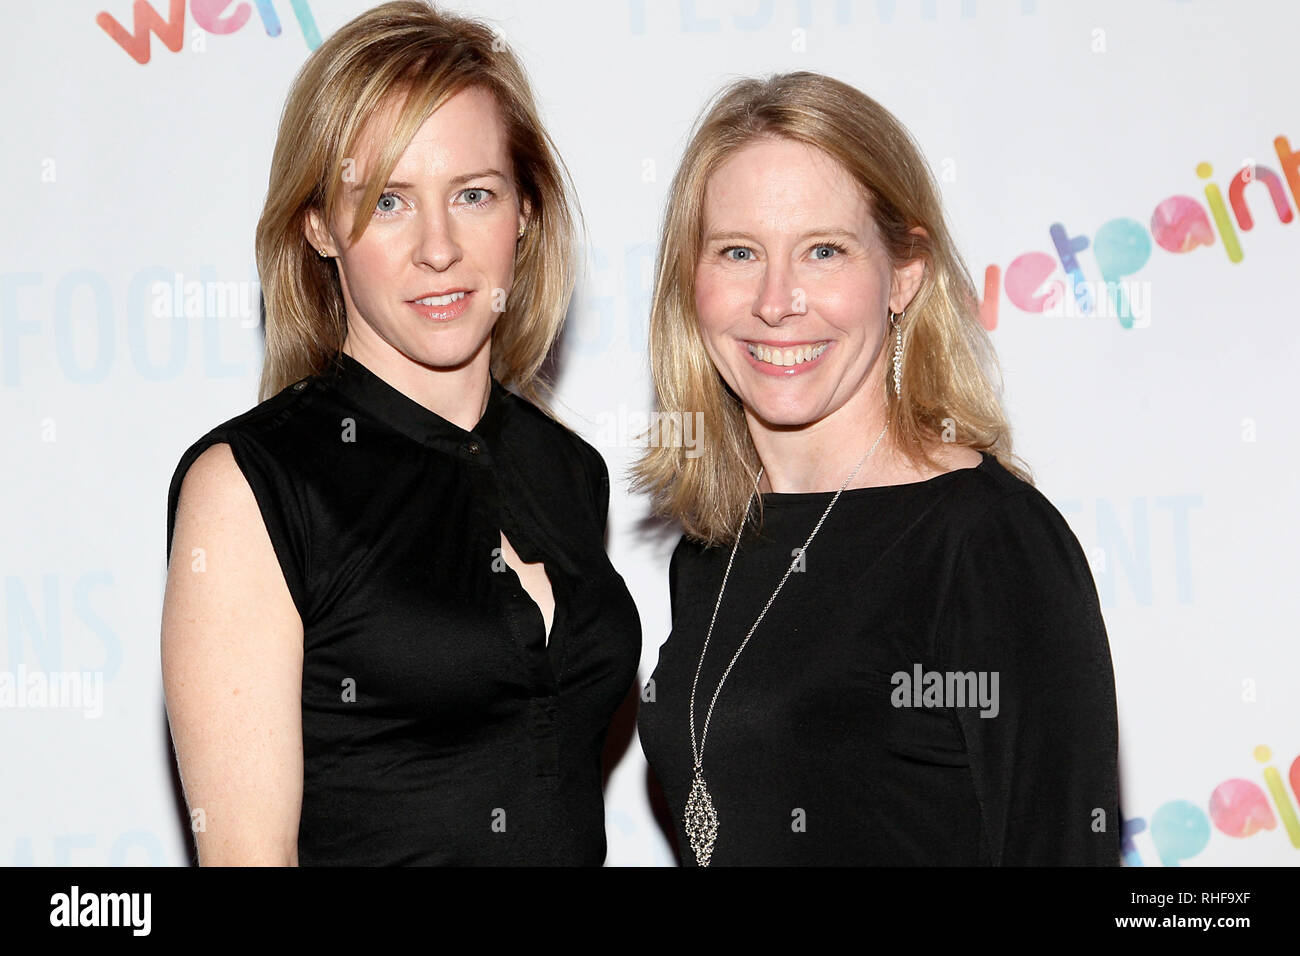 Amy hargreaves hot